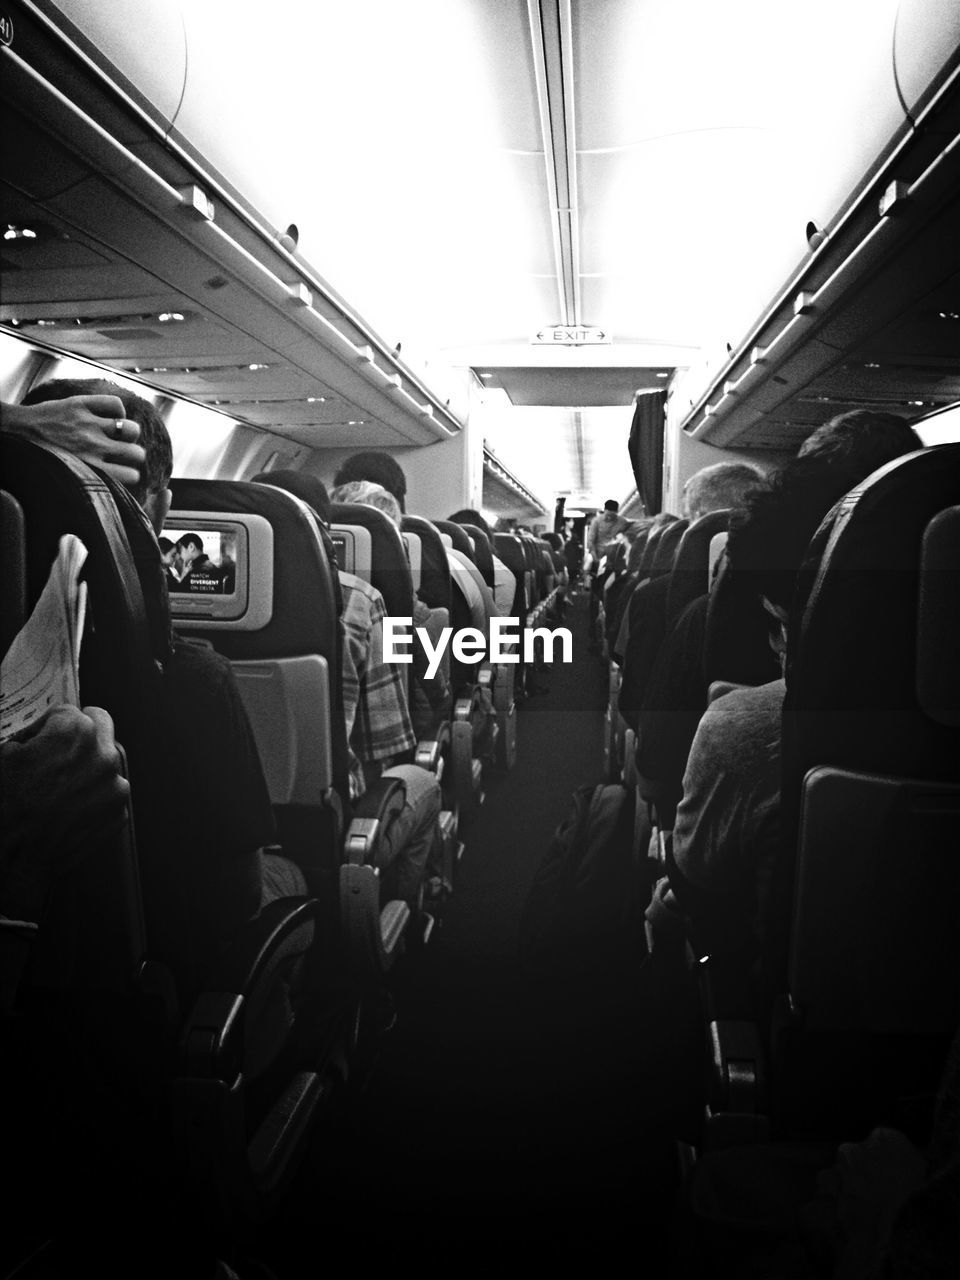 People traveling in airplane